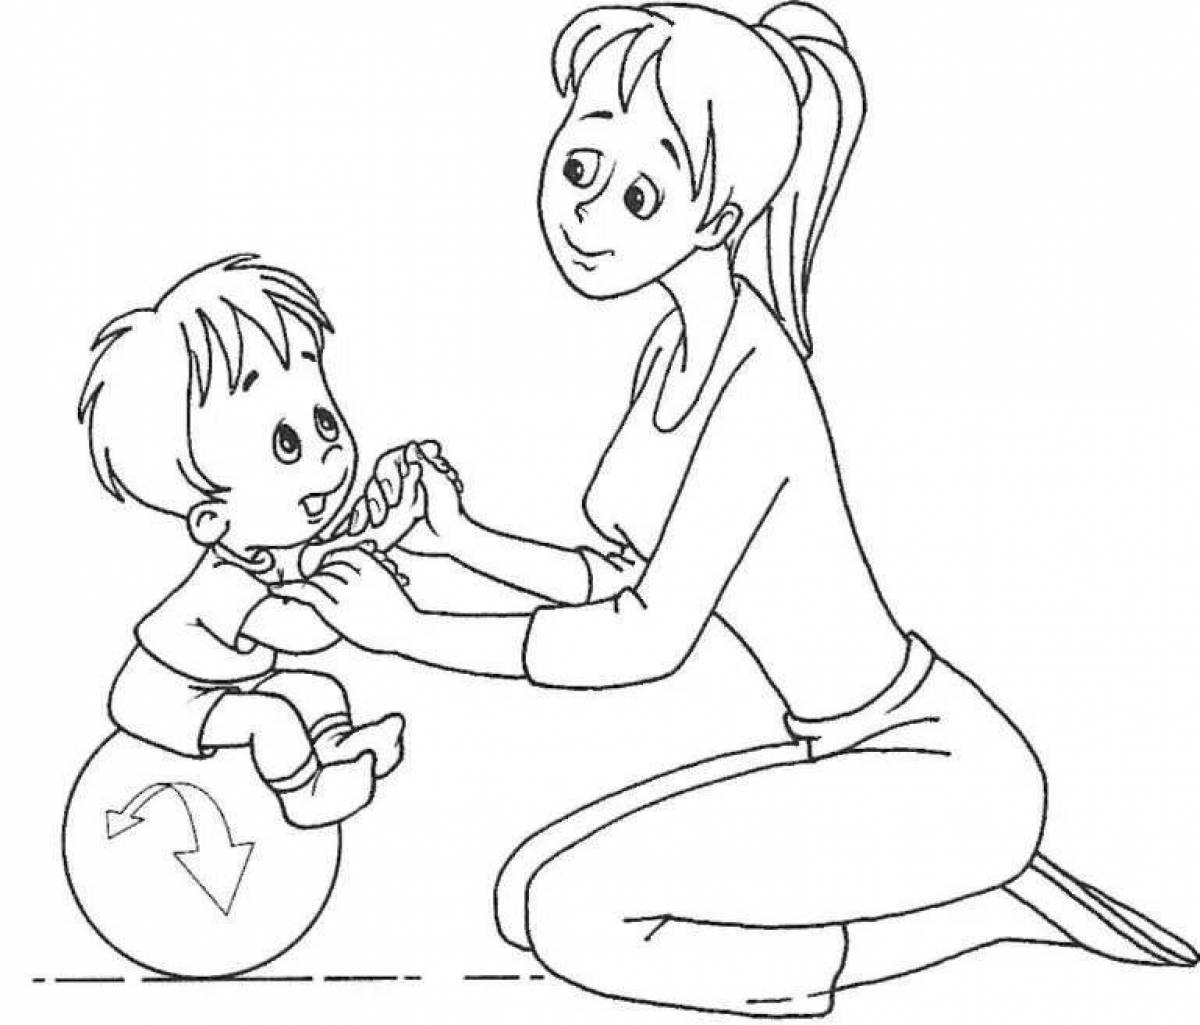 Coloring playful mother and baby